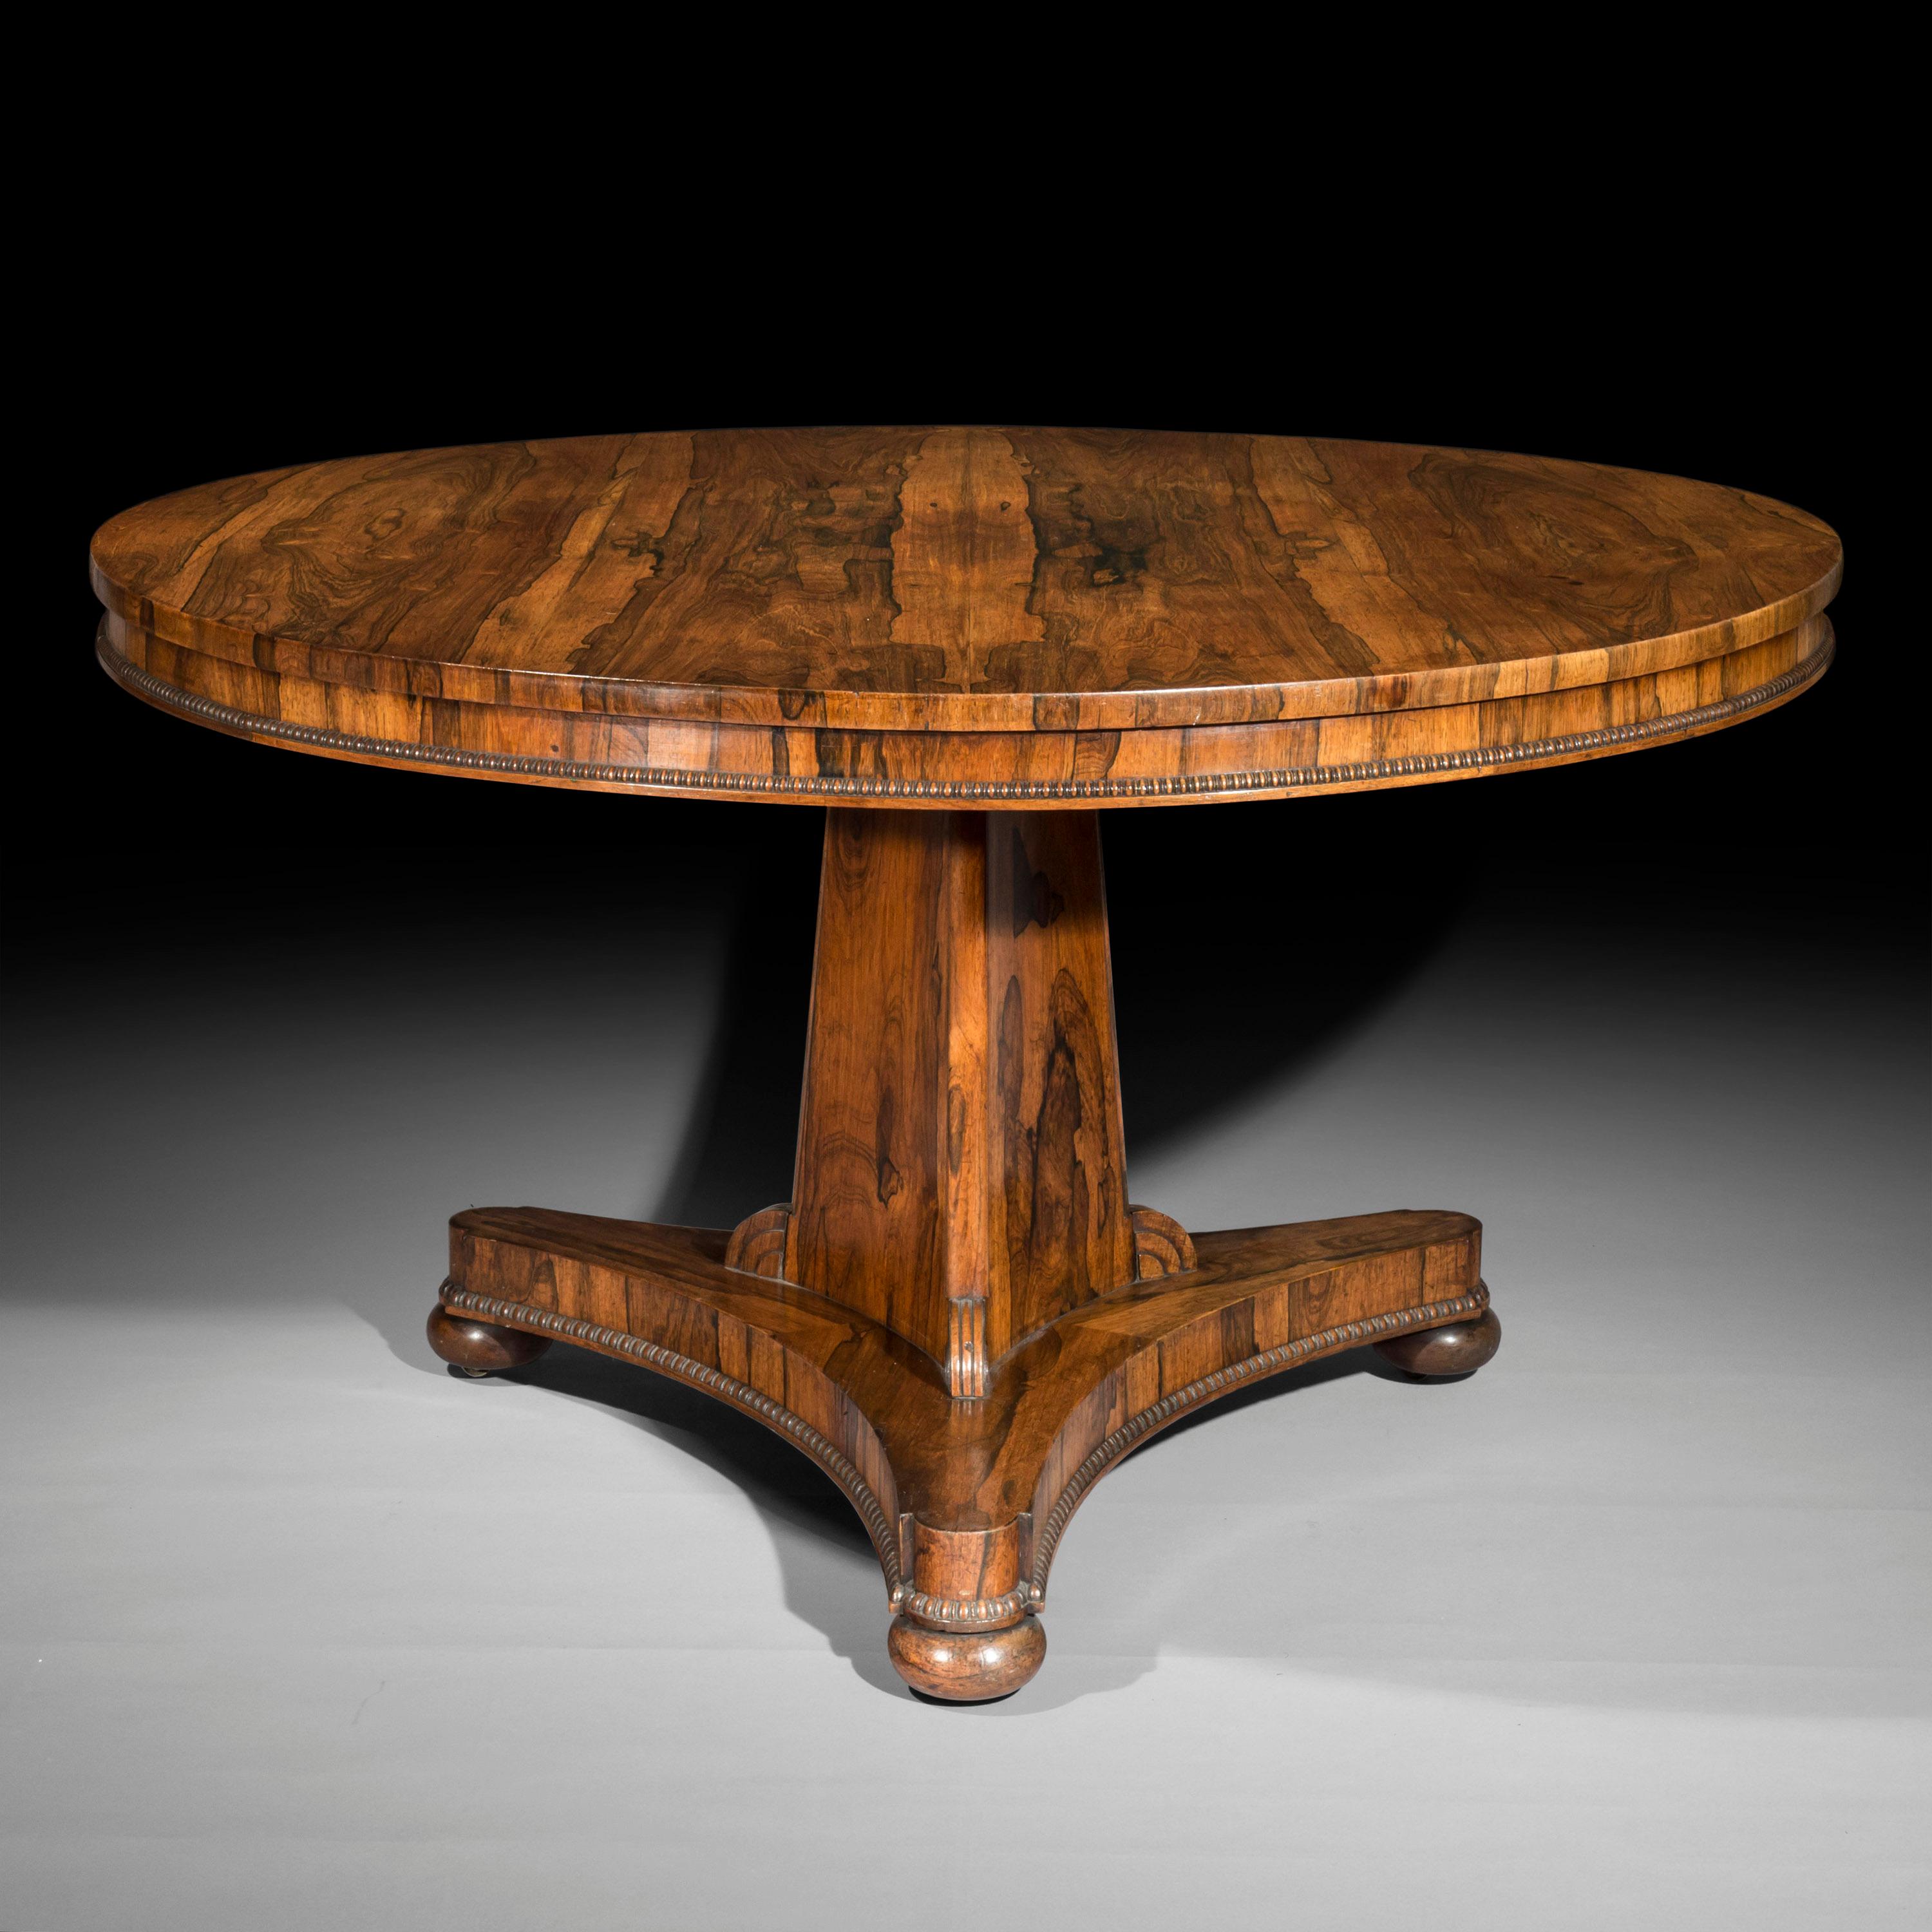 Padouk Antique Regency Dining Table, Early 19th Century, Sits Six